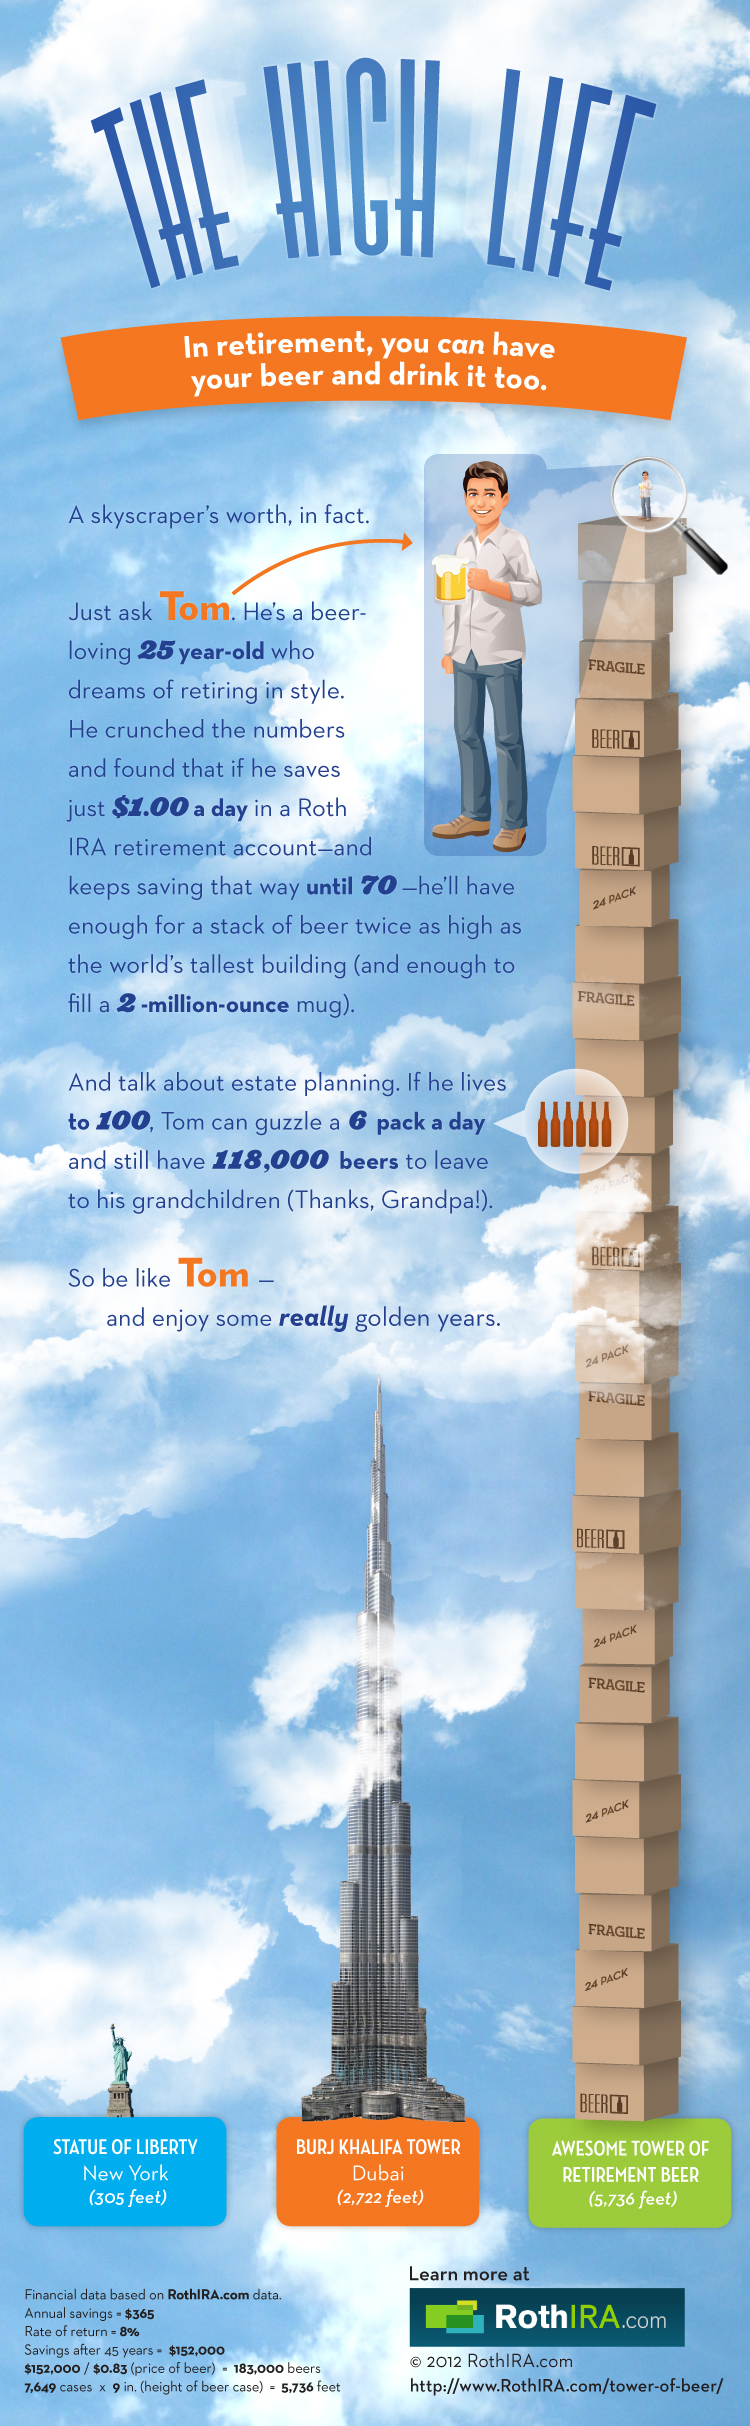 Roth IRA The Awesome Tower of Beer infographic